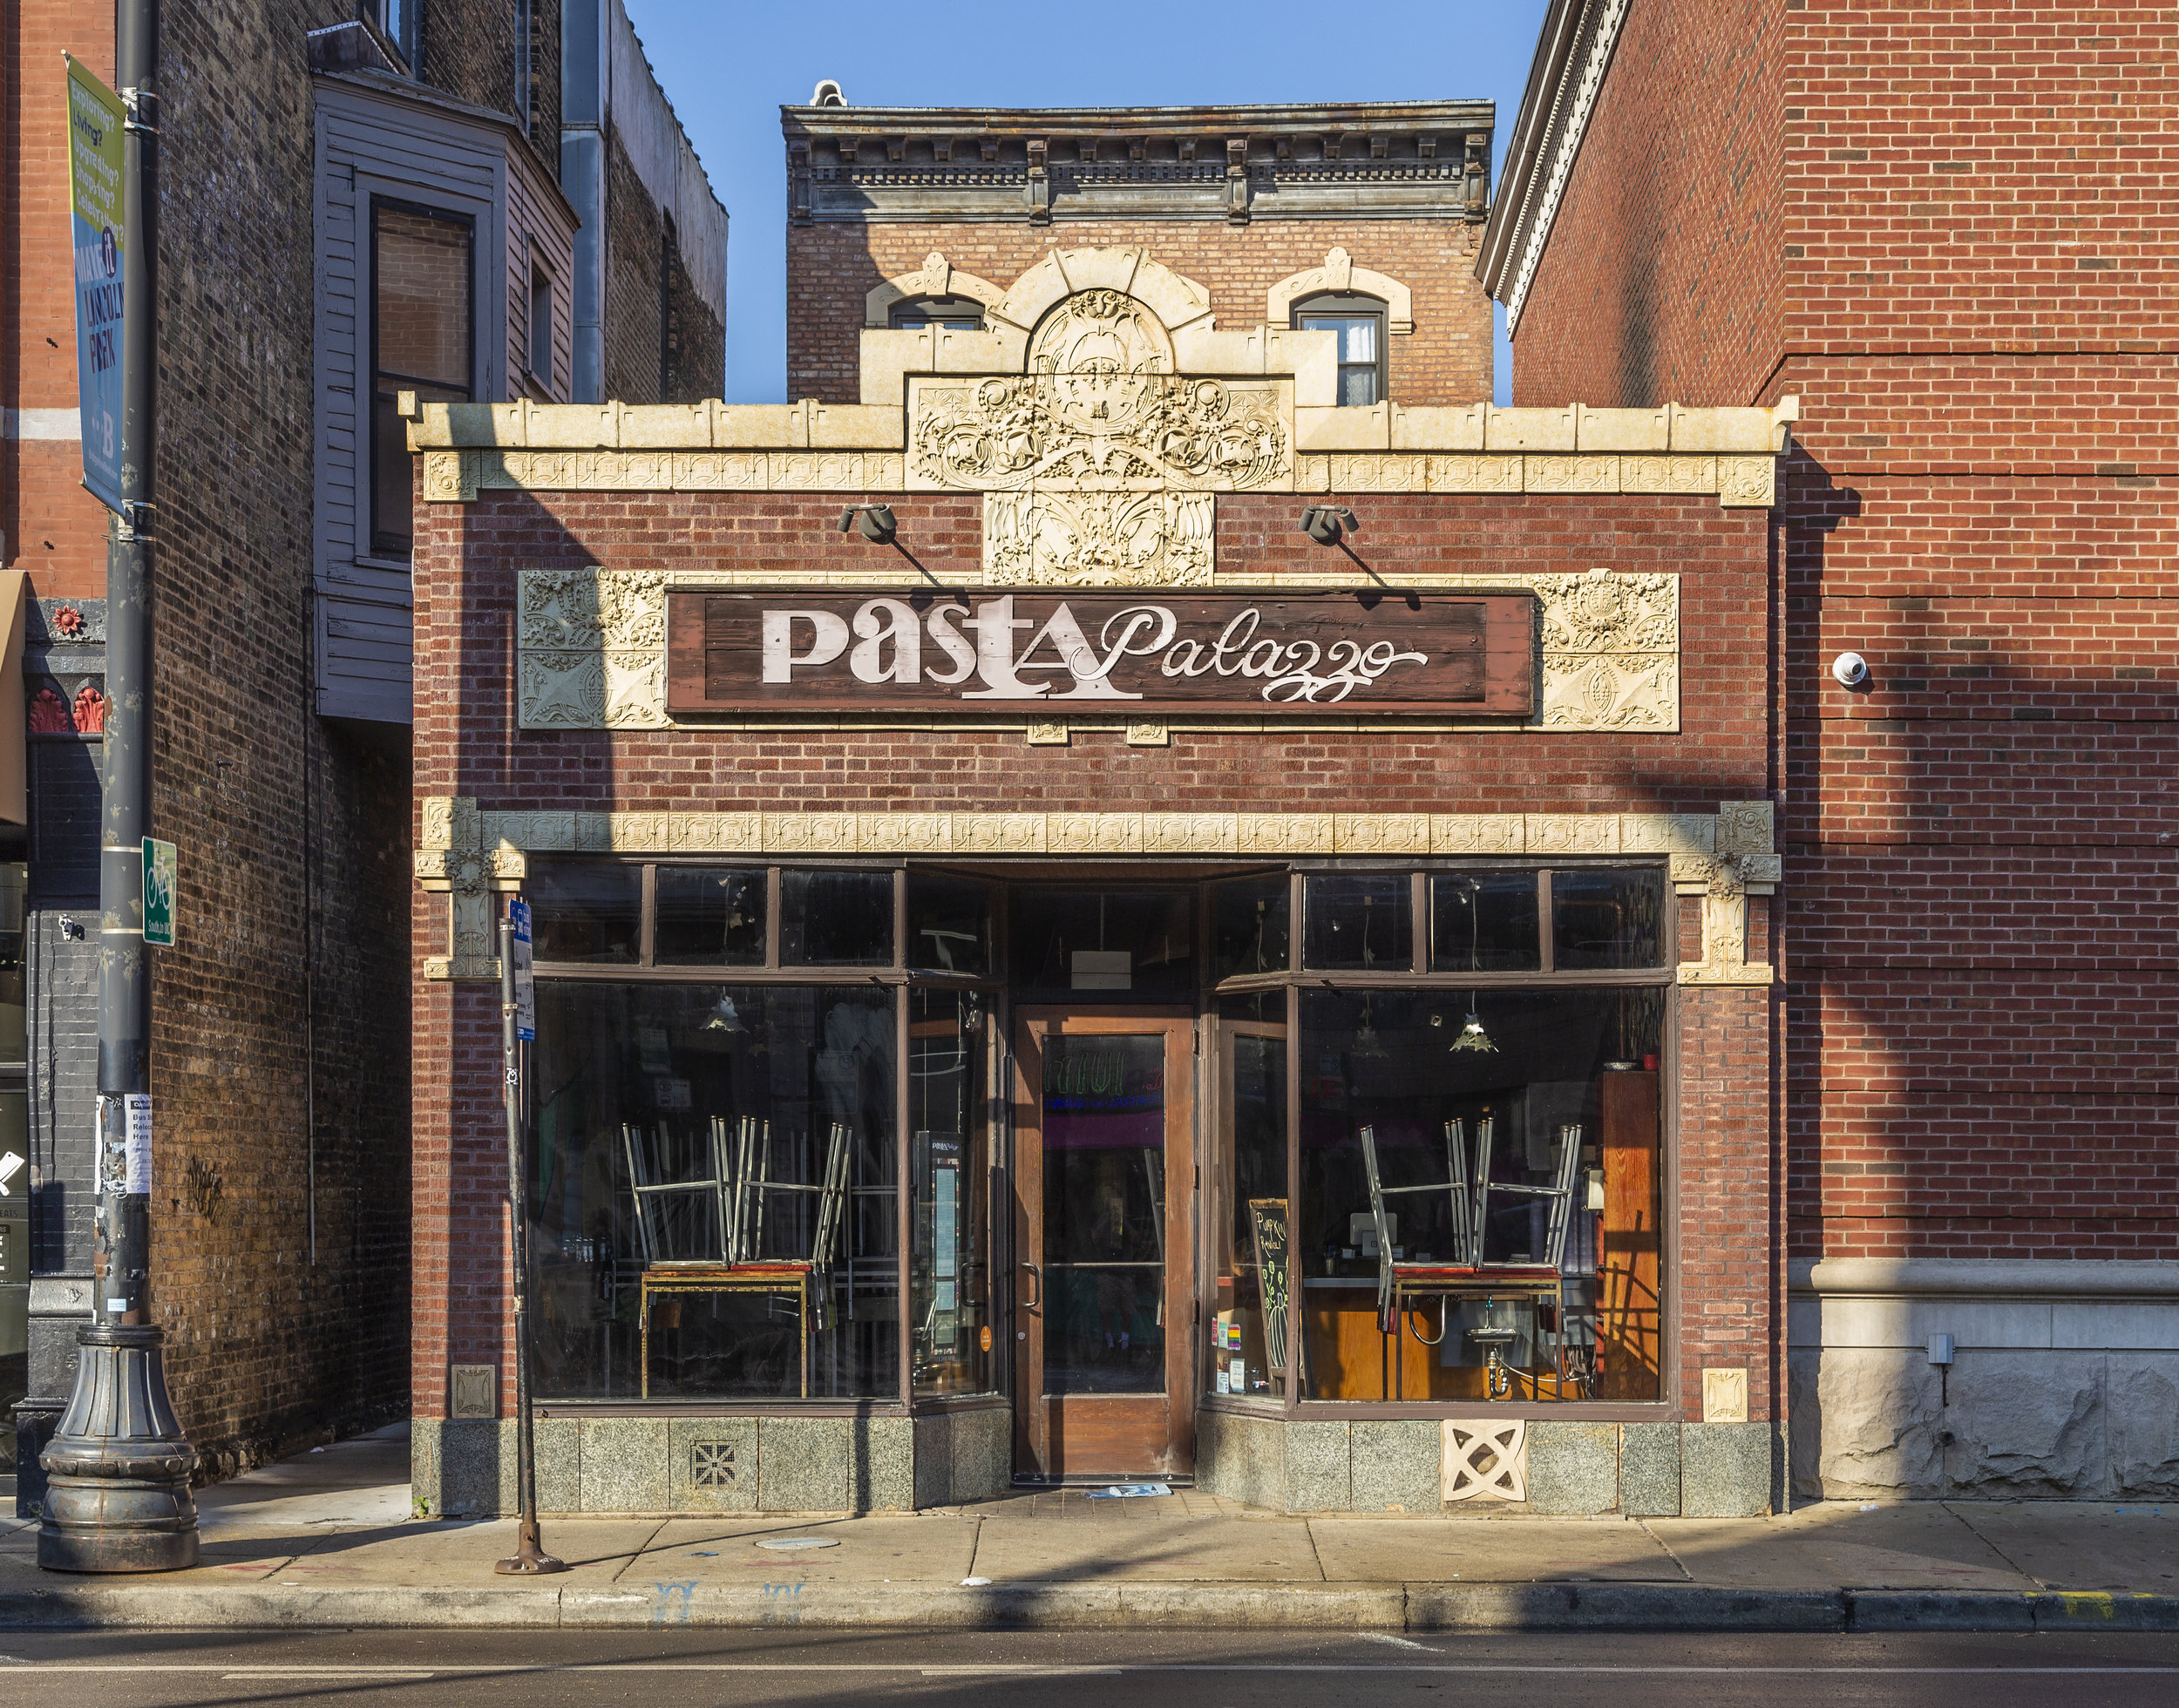 Halsted, 1966, Owner UN, Architect BJ Burns, Pasta Palazzo, 1924_9135.jpg